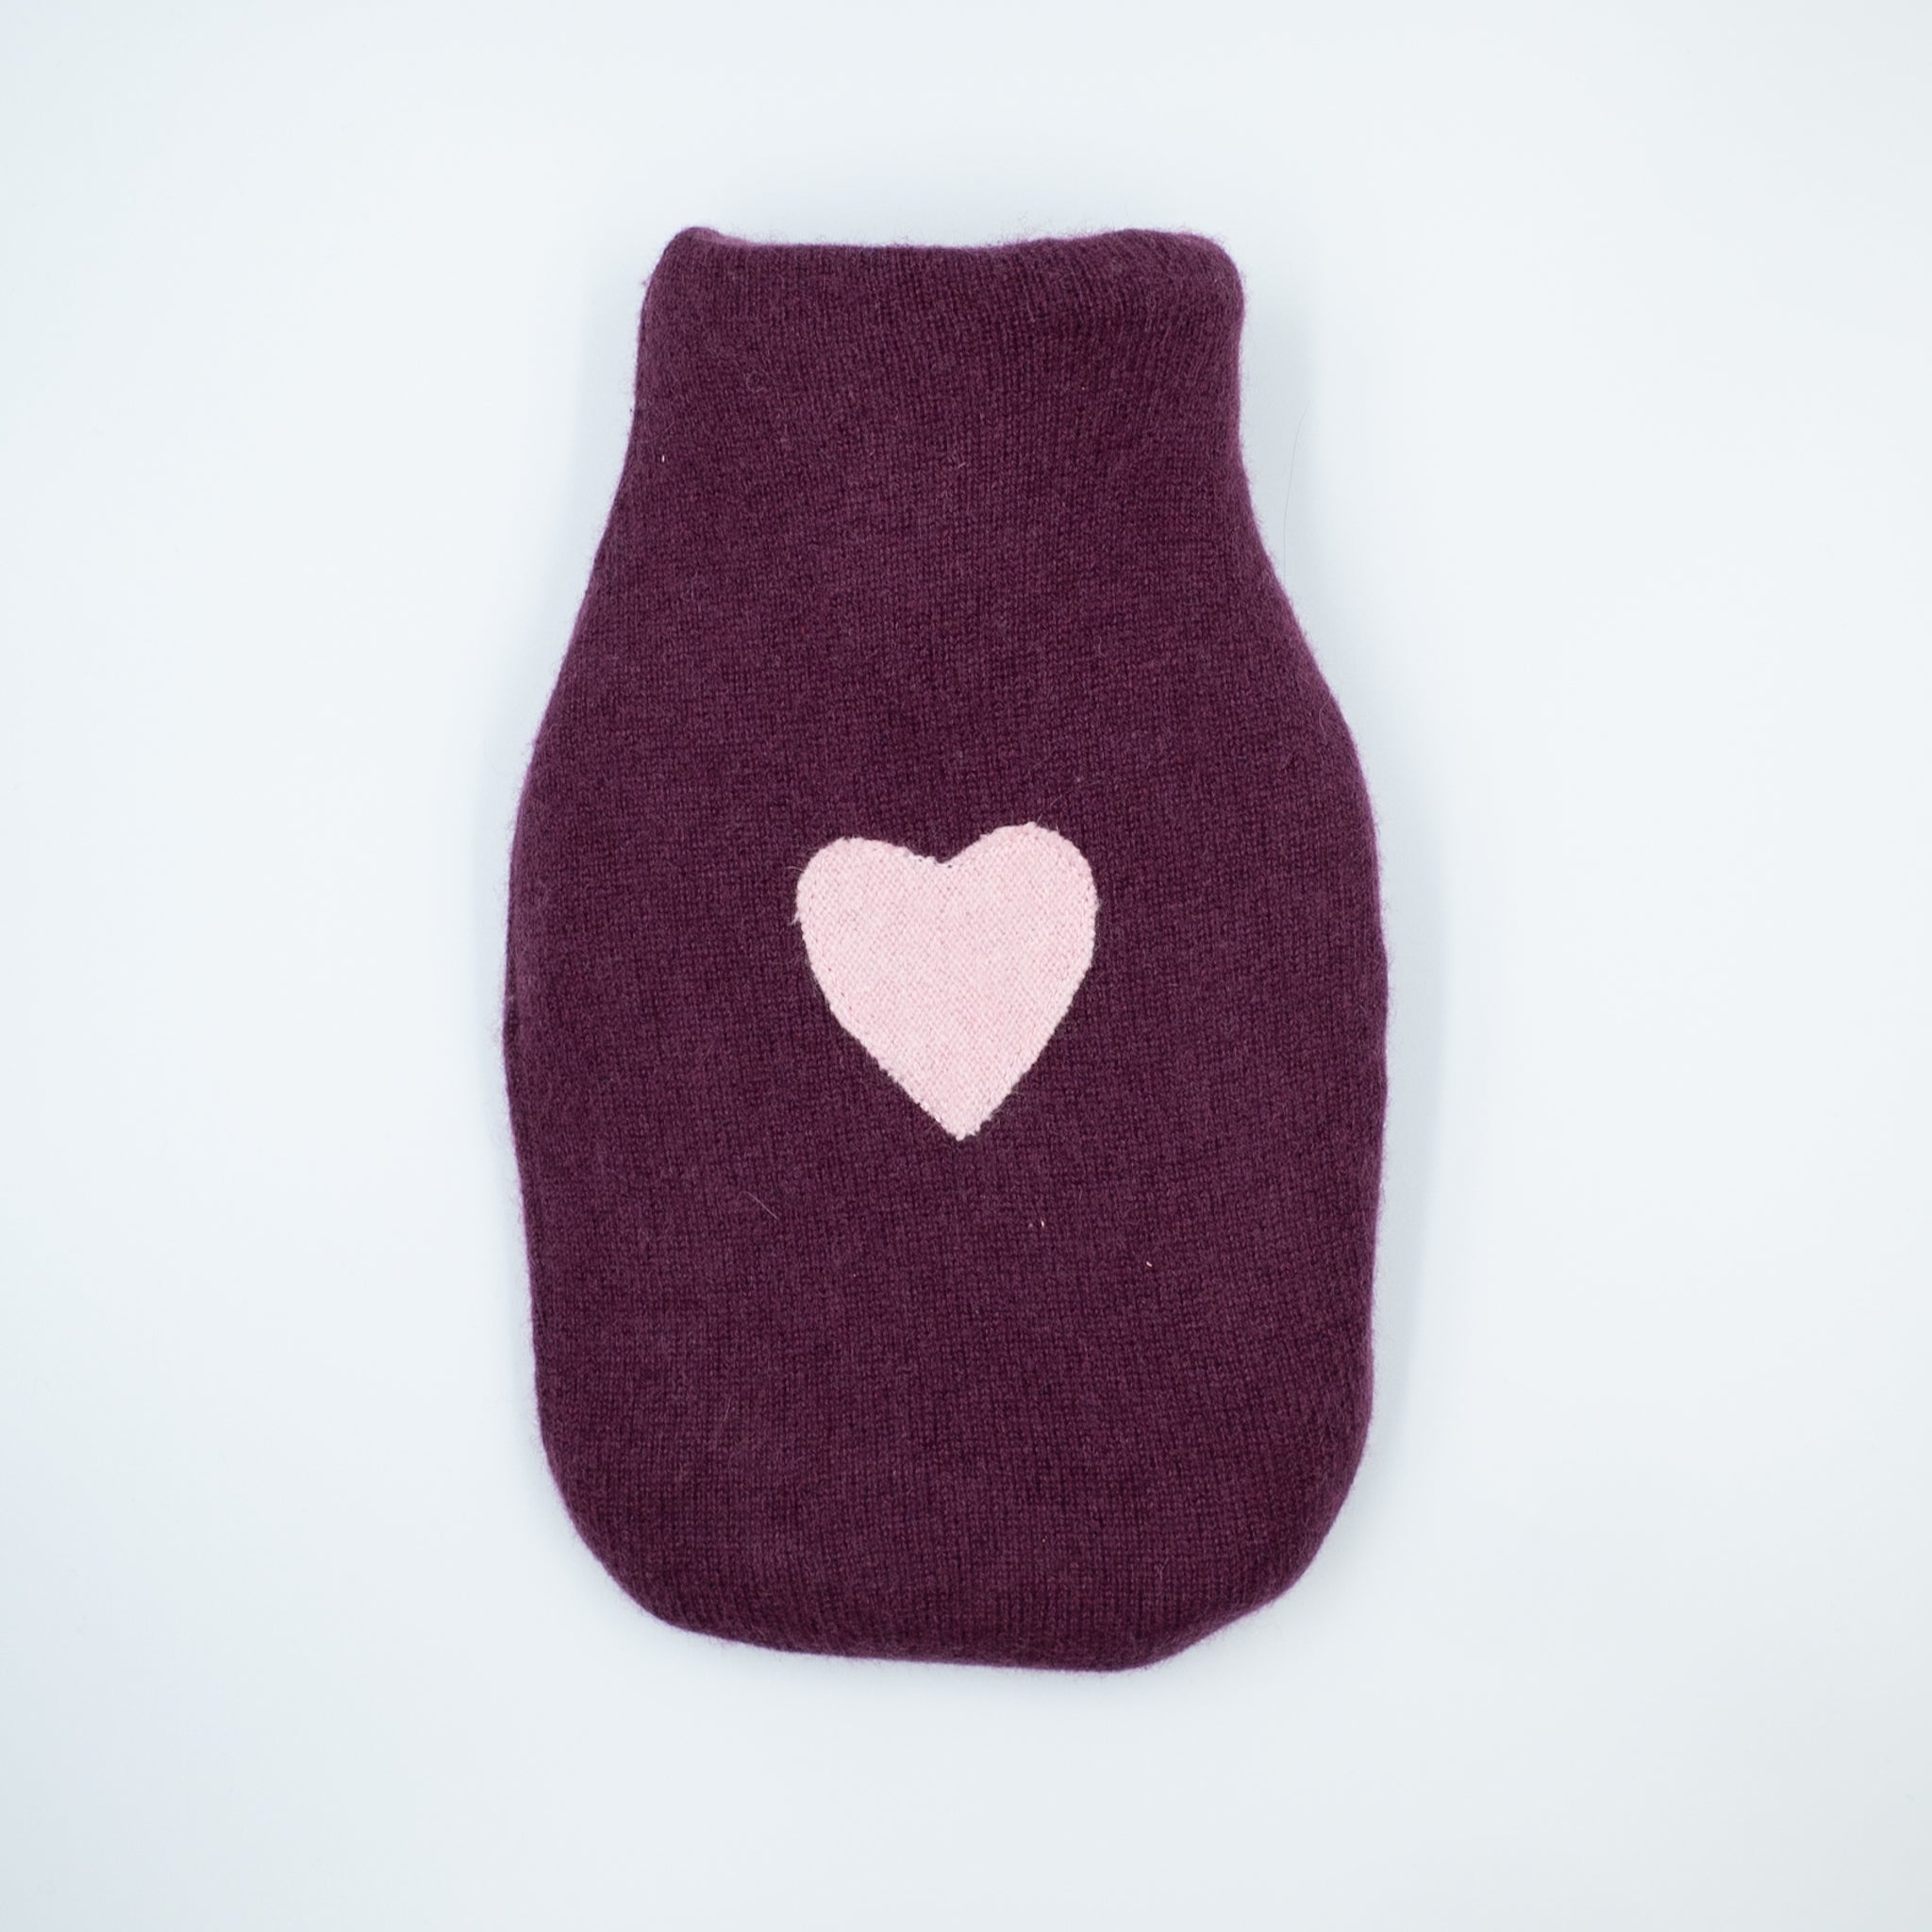 Claret Cashmere Small Hot Water Bottle